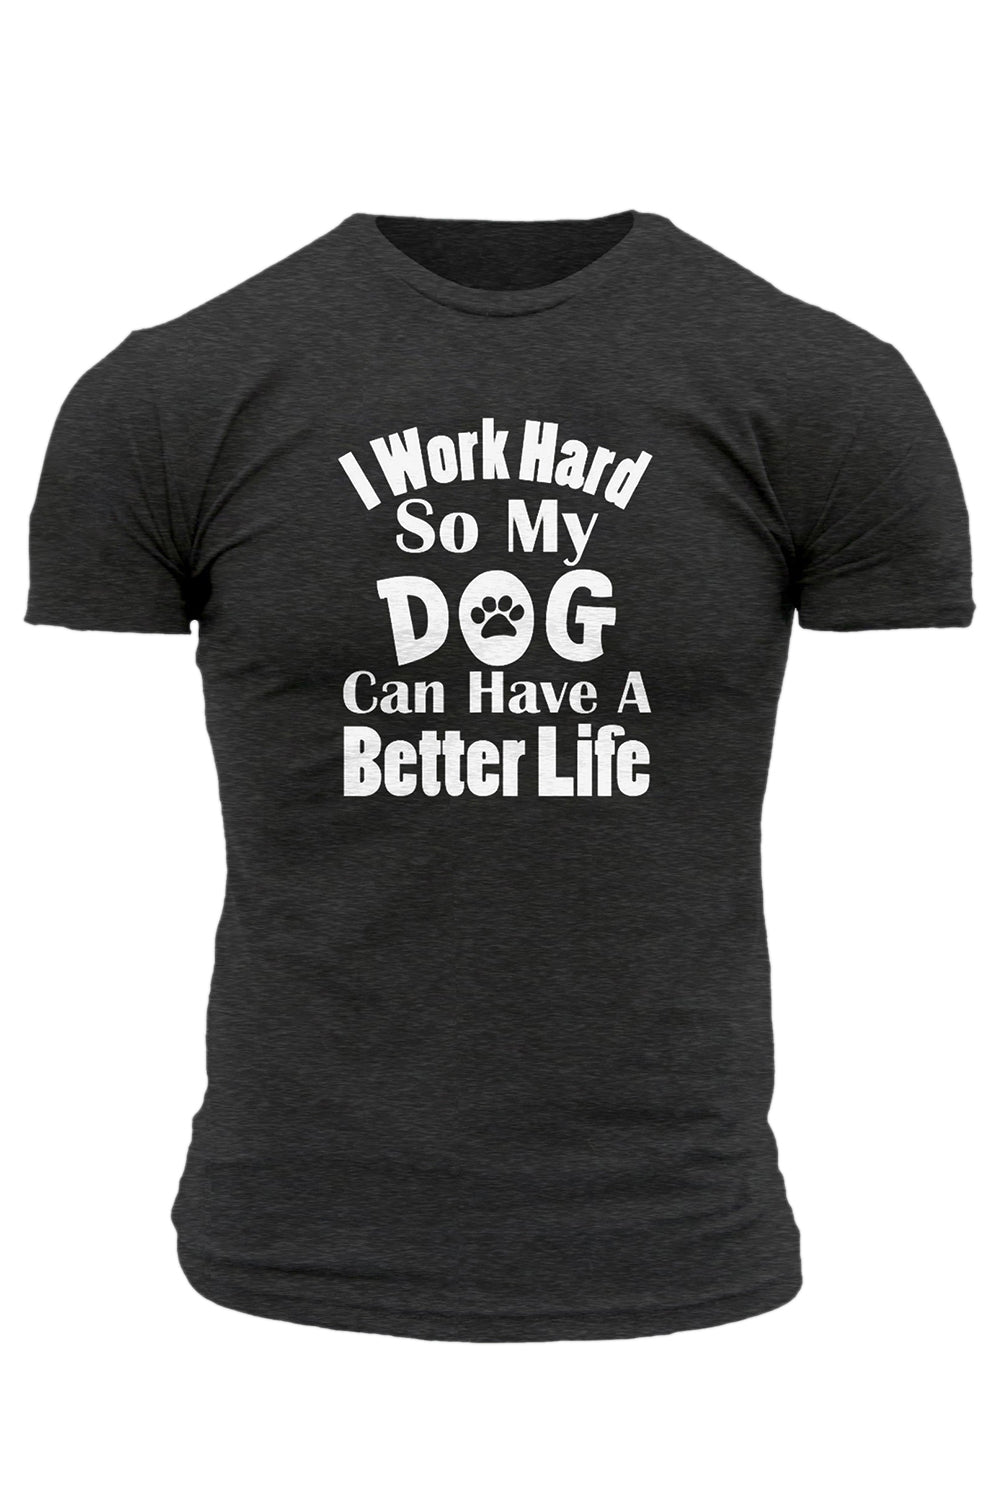 Gray I Work Hard So My Dog Can Have A Better Life T Shirt Men's Tops JT's Designer Fashion